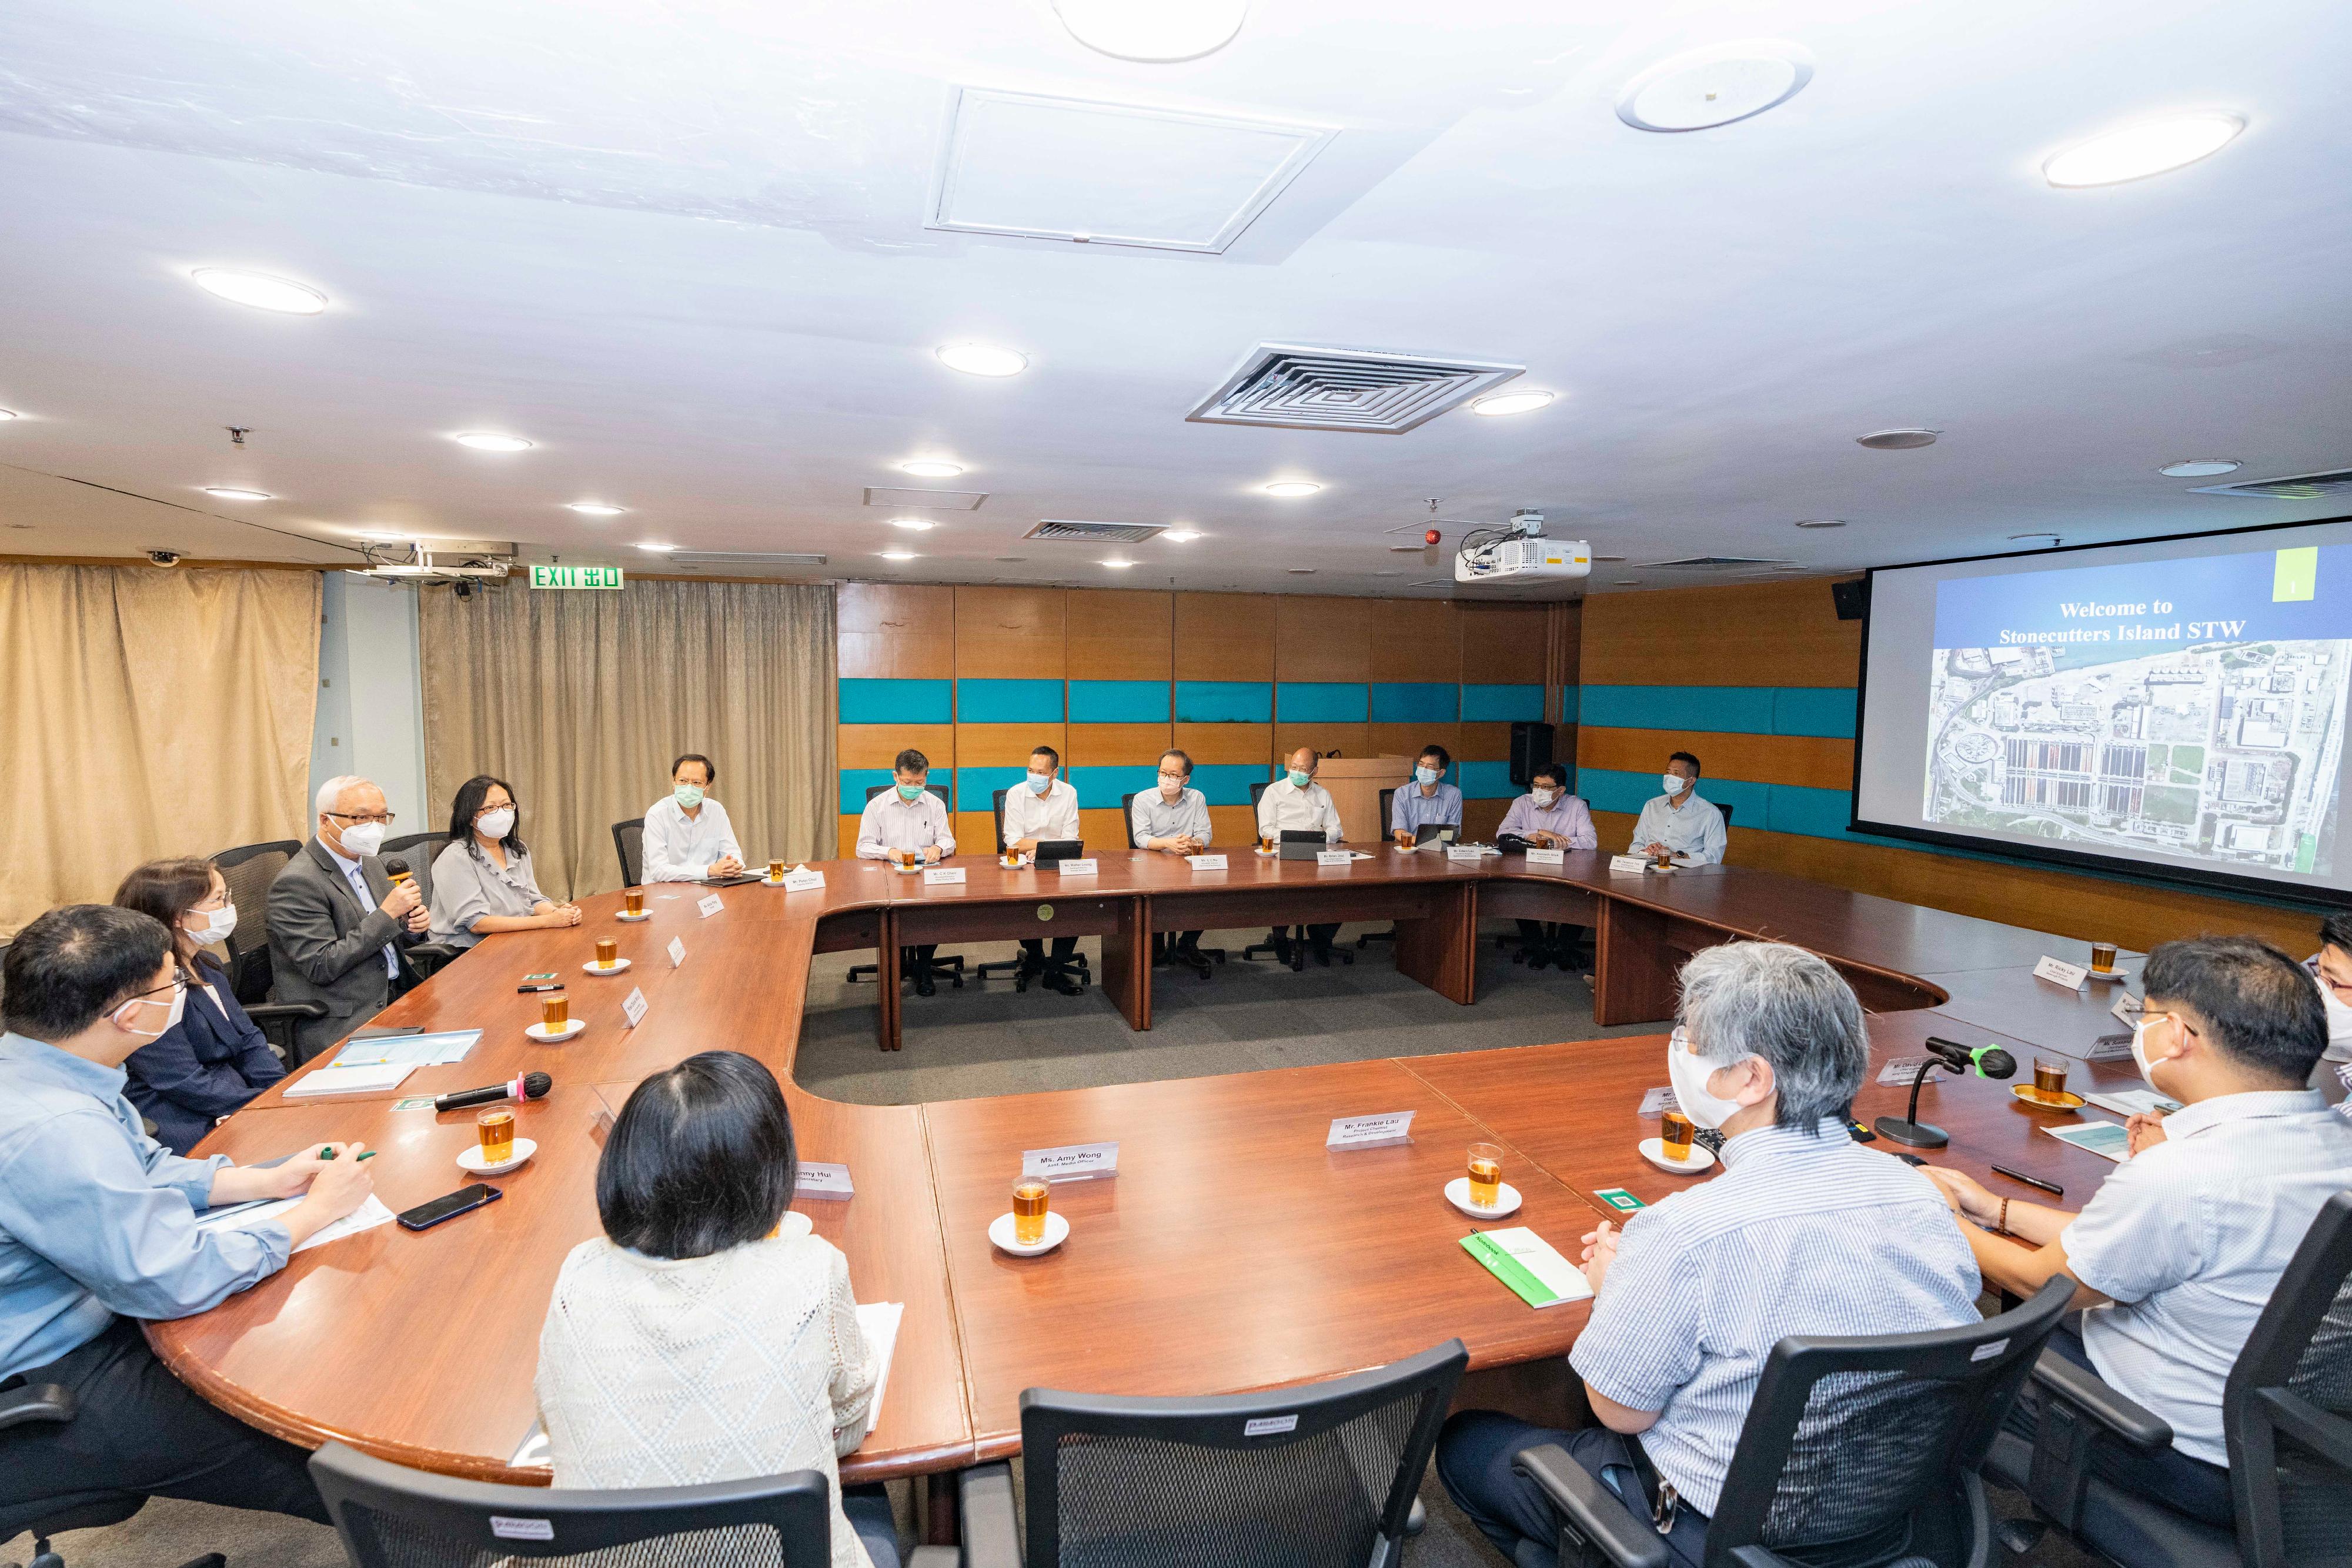 The Secretary for Environment and Ecology, Mr Tse Chin-wan, and the Under Secretary for Environment and Ecology, Miss Diane Wong, today (September 7) visited the Stonecutters Island Sewage Treatment Works of the Drainage Services Department. Photo shows Mr Tse (rear, third left) and Miss Wong (rear, second left) meeting with the Director of Drainage Services, Ms Alice Pang (rear, fourth left), and the directorate staff to learn more about the work of the department.